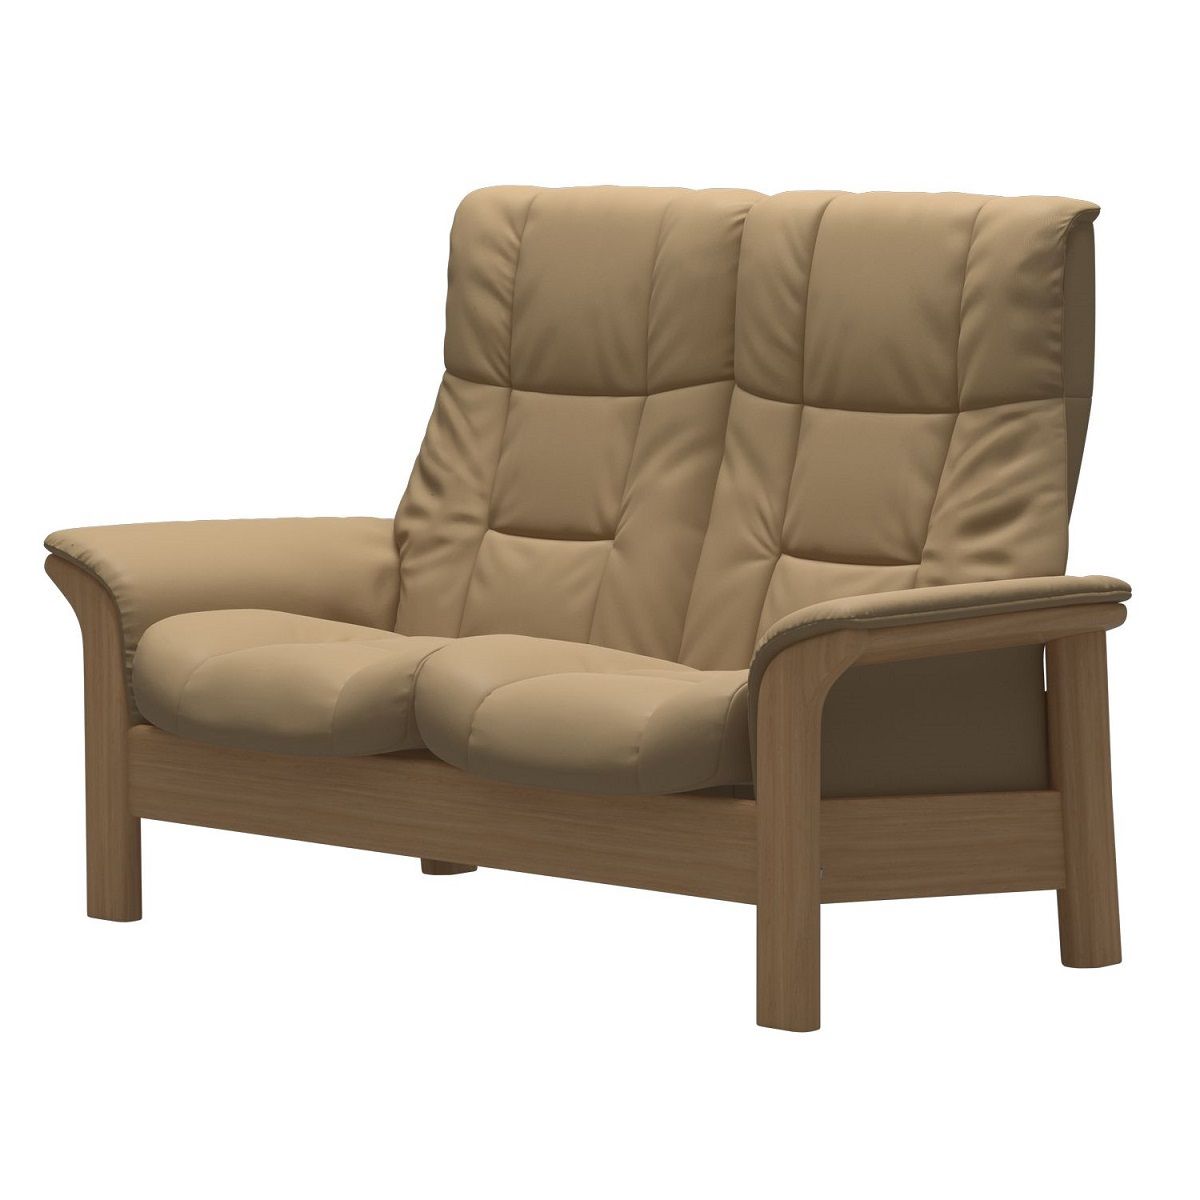 Stressless Windsor 2 Seater High Back Sand Sofa | It0196966 Throughout Windsor Sofas (View 15 of 15)